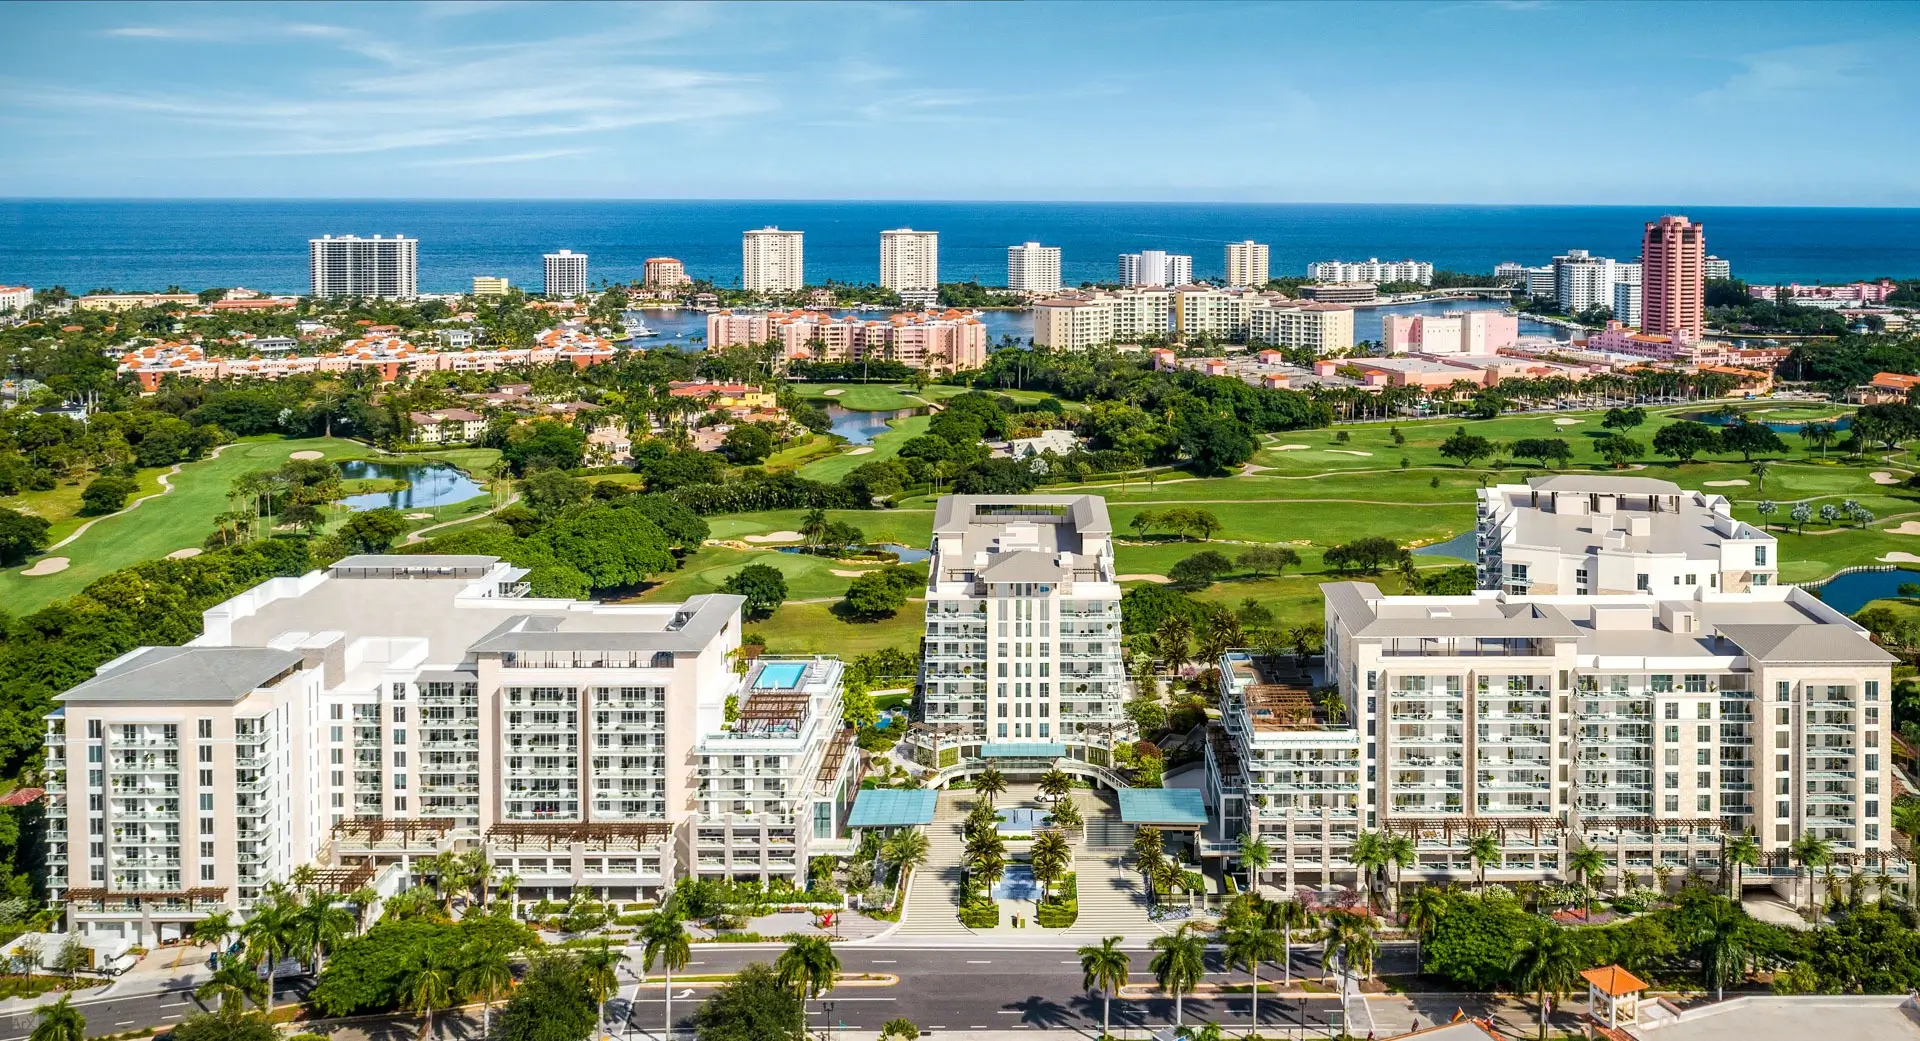 Drone shot above Alina and the Boca Raton Resort with views of the ocean